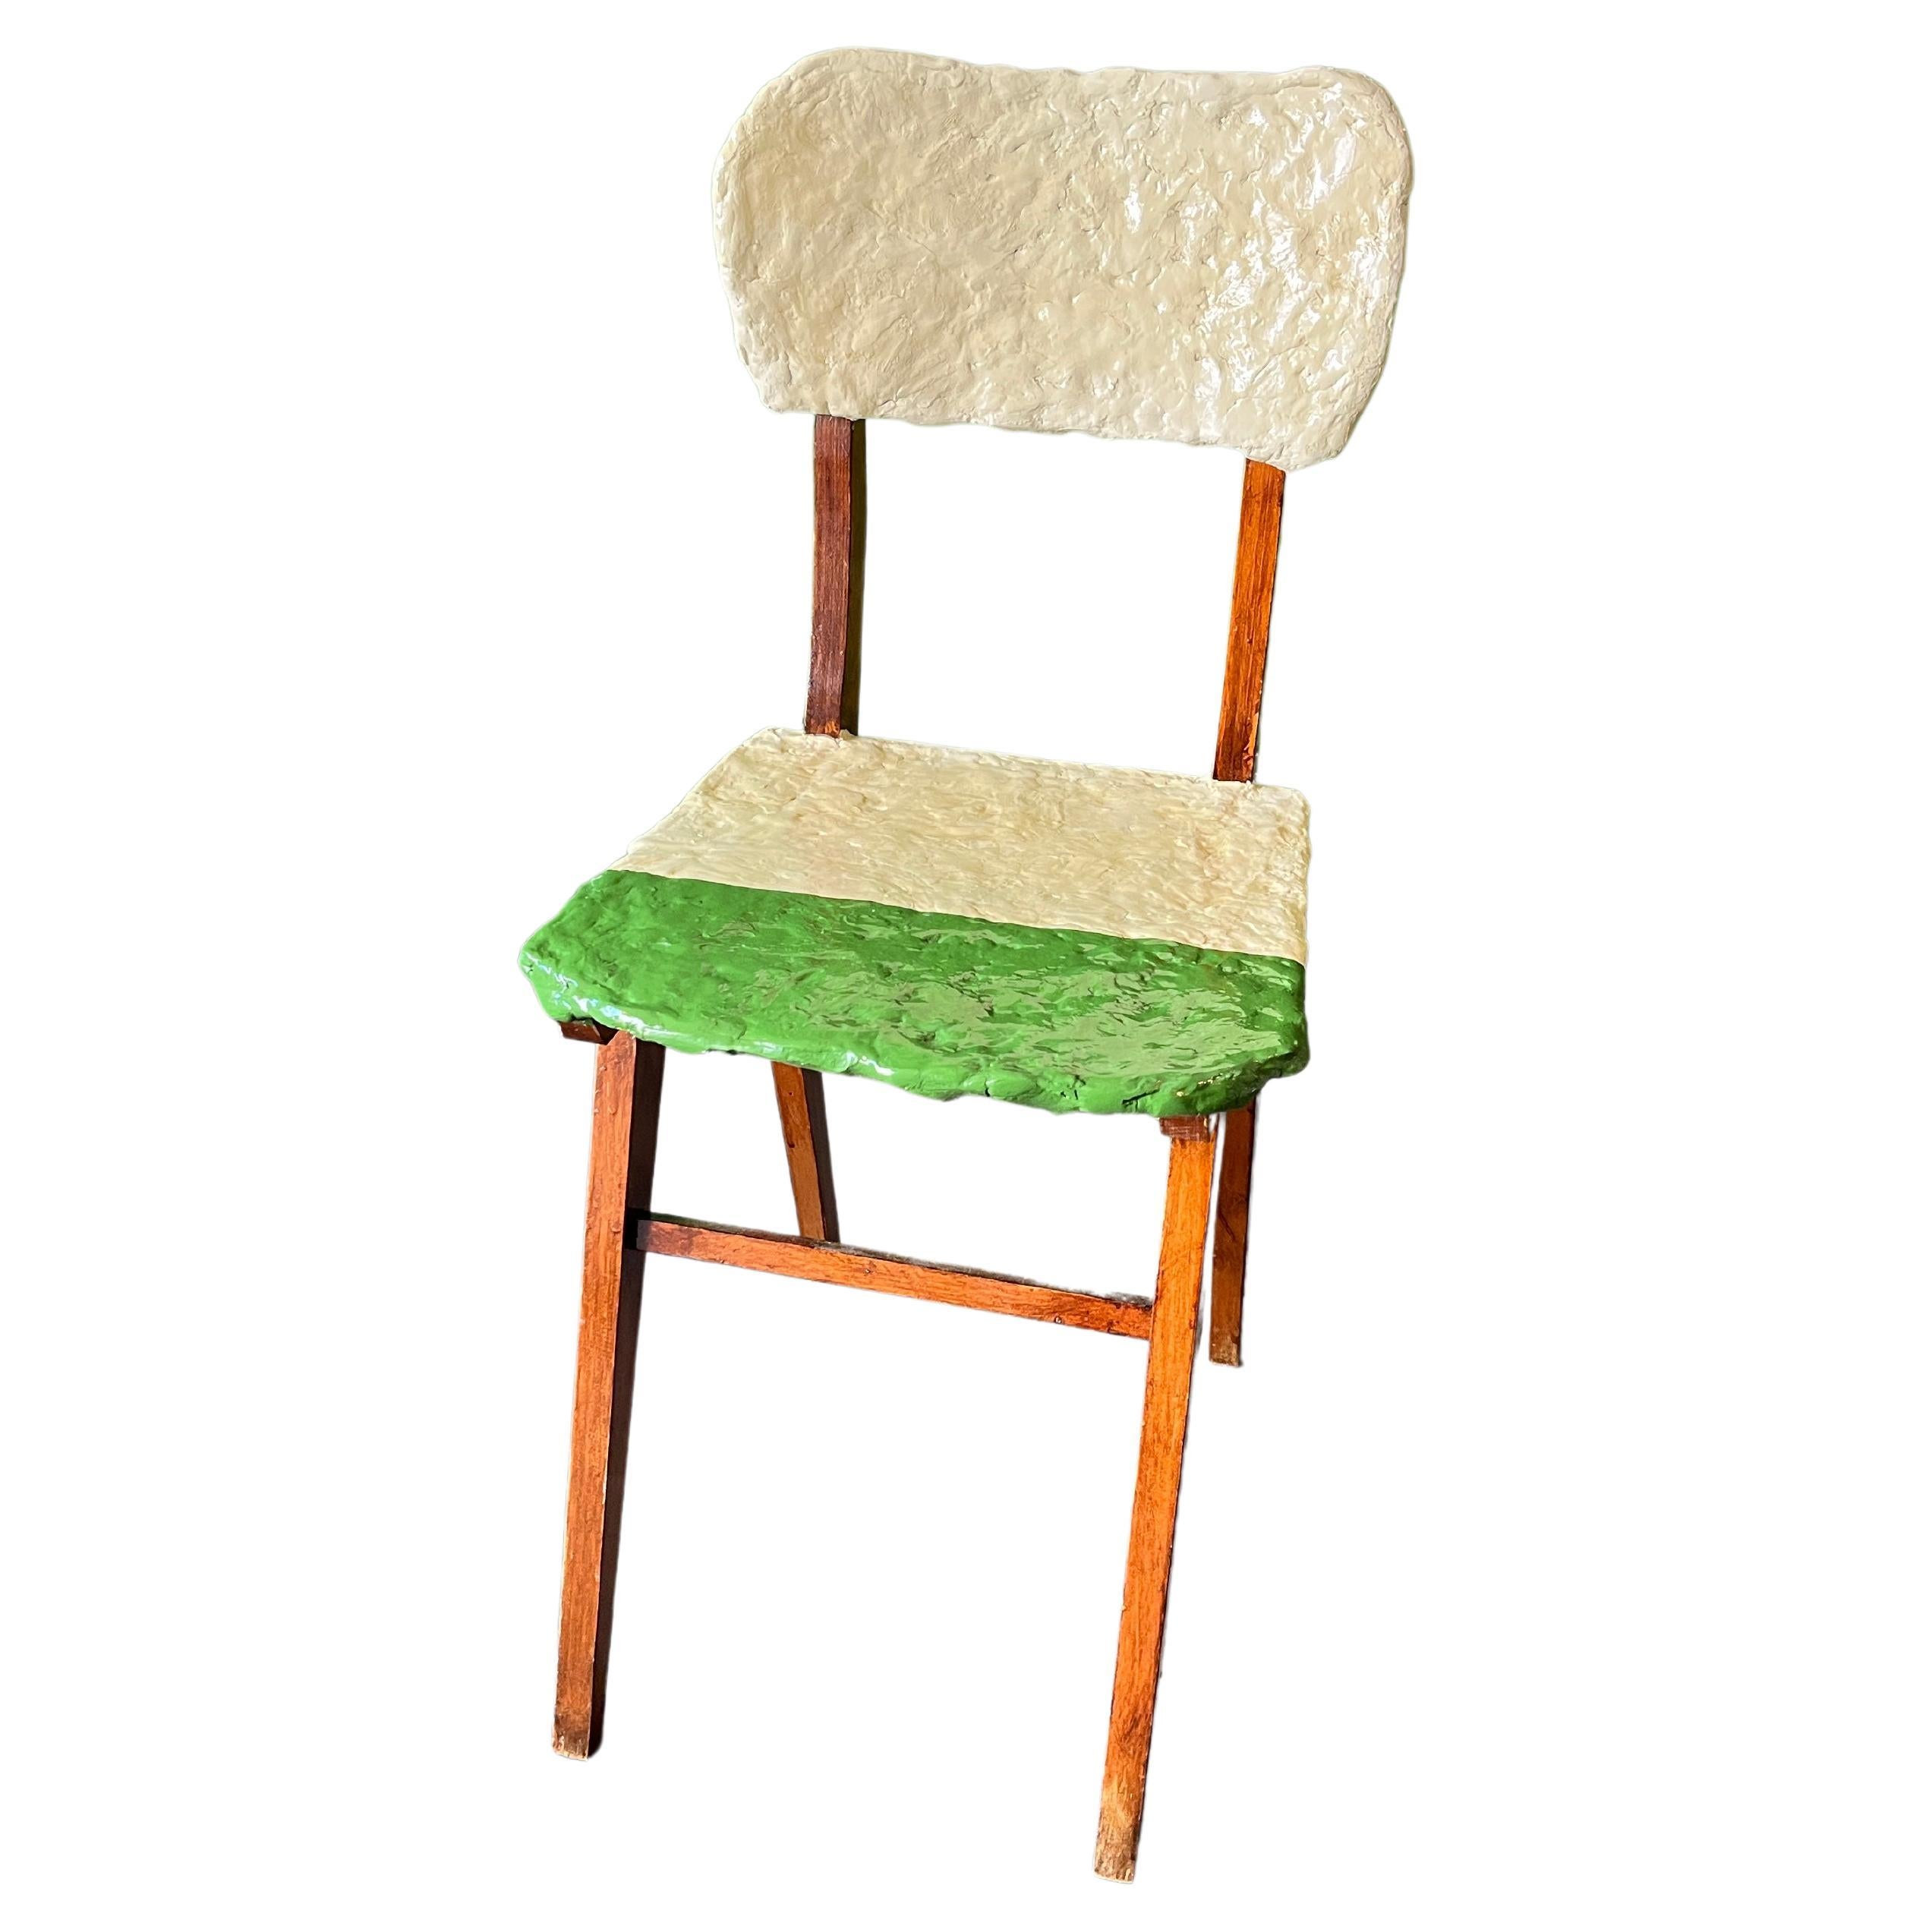 Pilion Chair, Ceramic Seat and Backrest by Markus Friedrich Staab